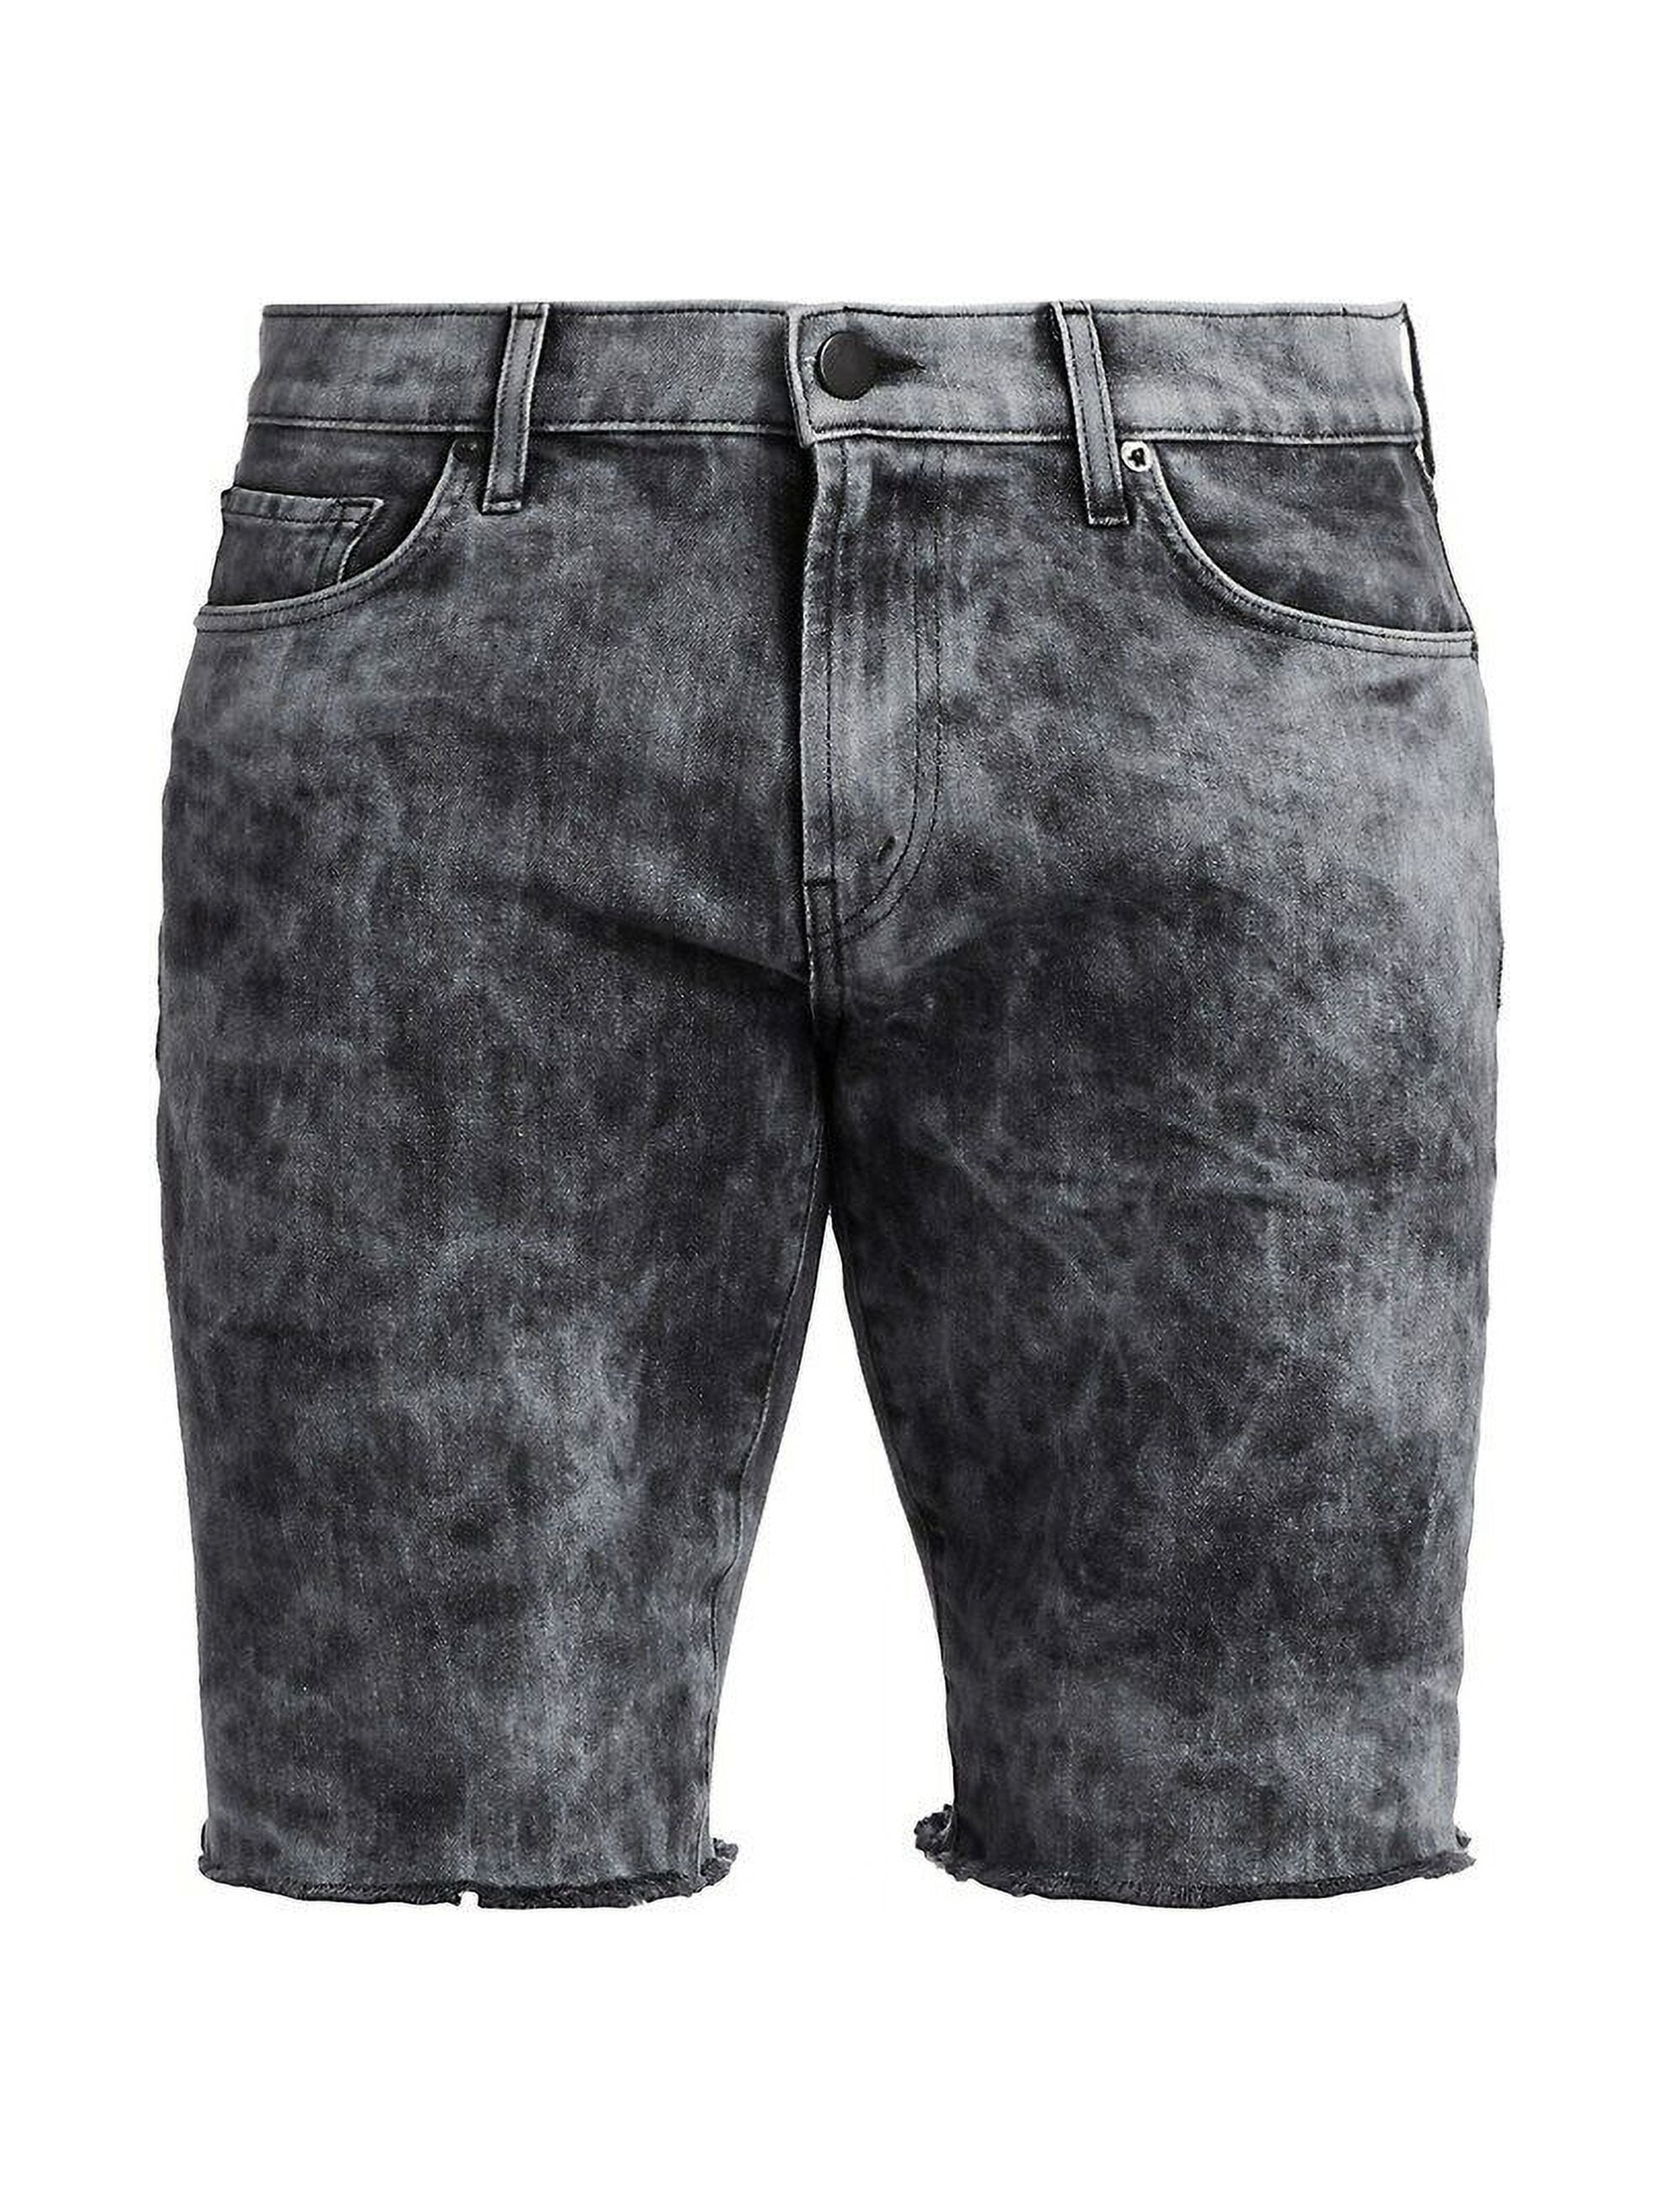 J Brand Men's Relaxed Fit Eli Denim Cut-Off Shorts - Ghoste - Size 32